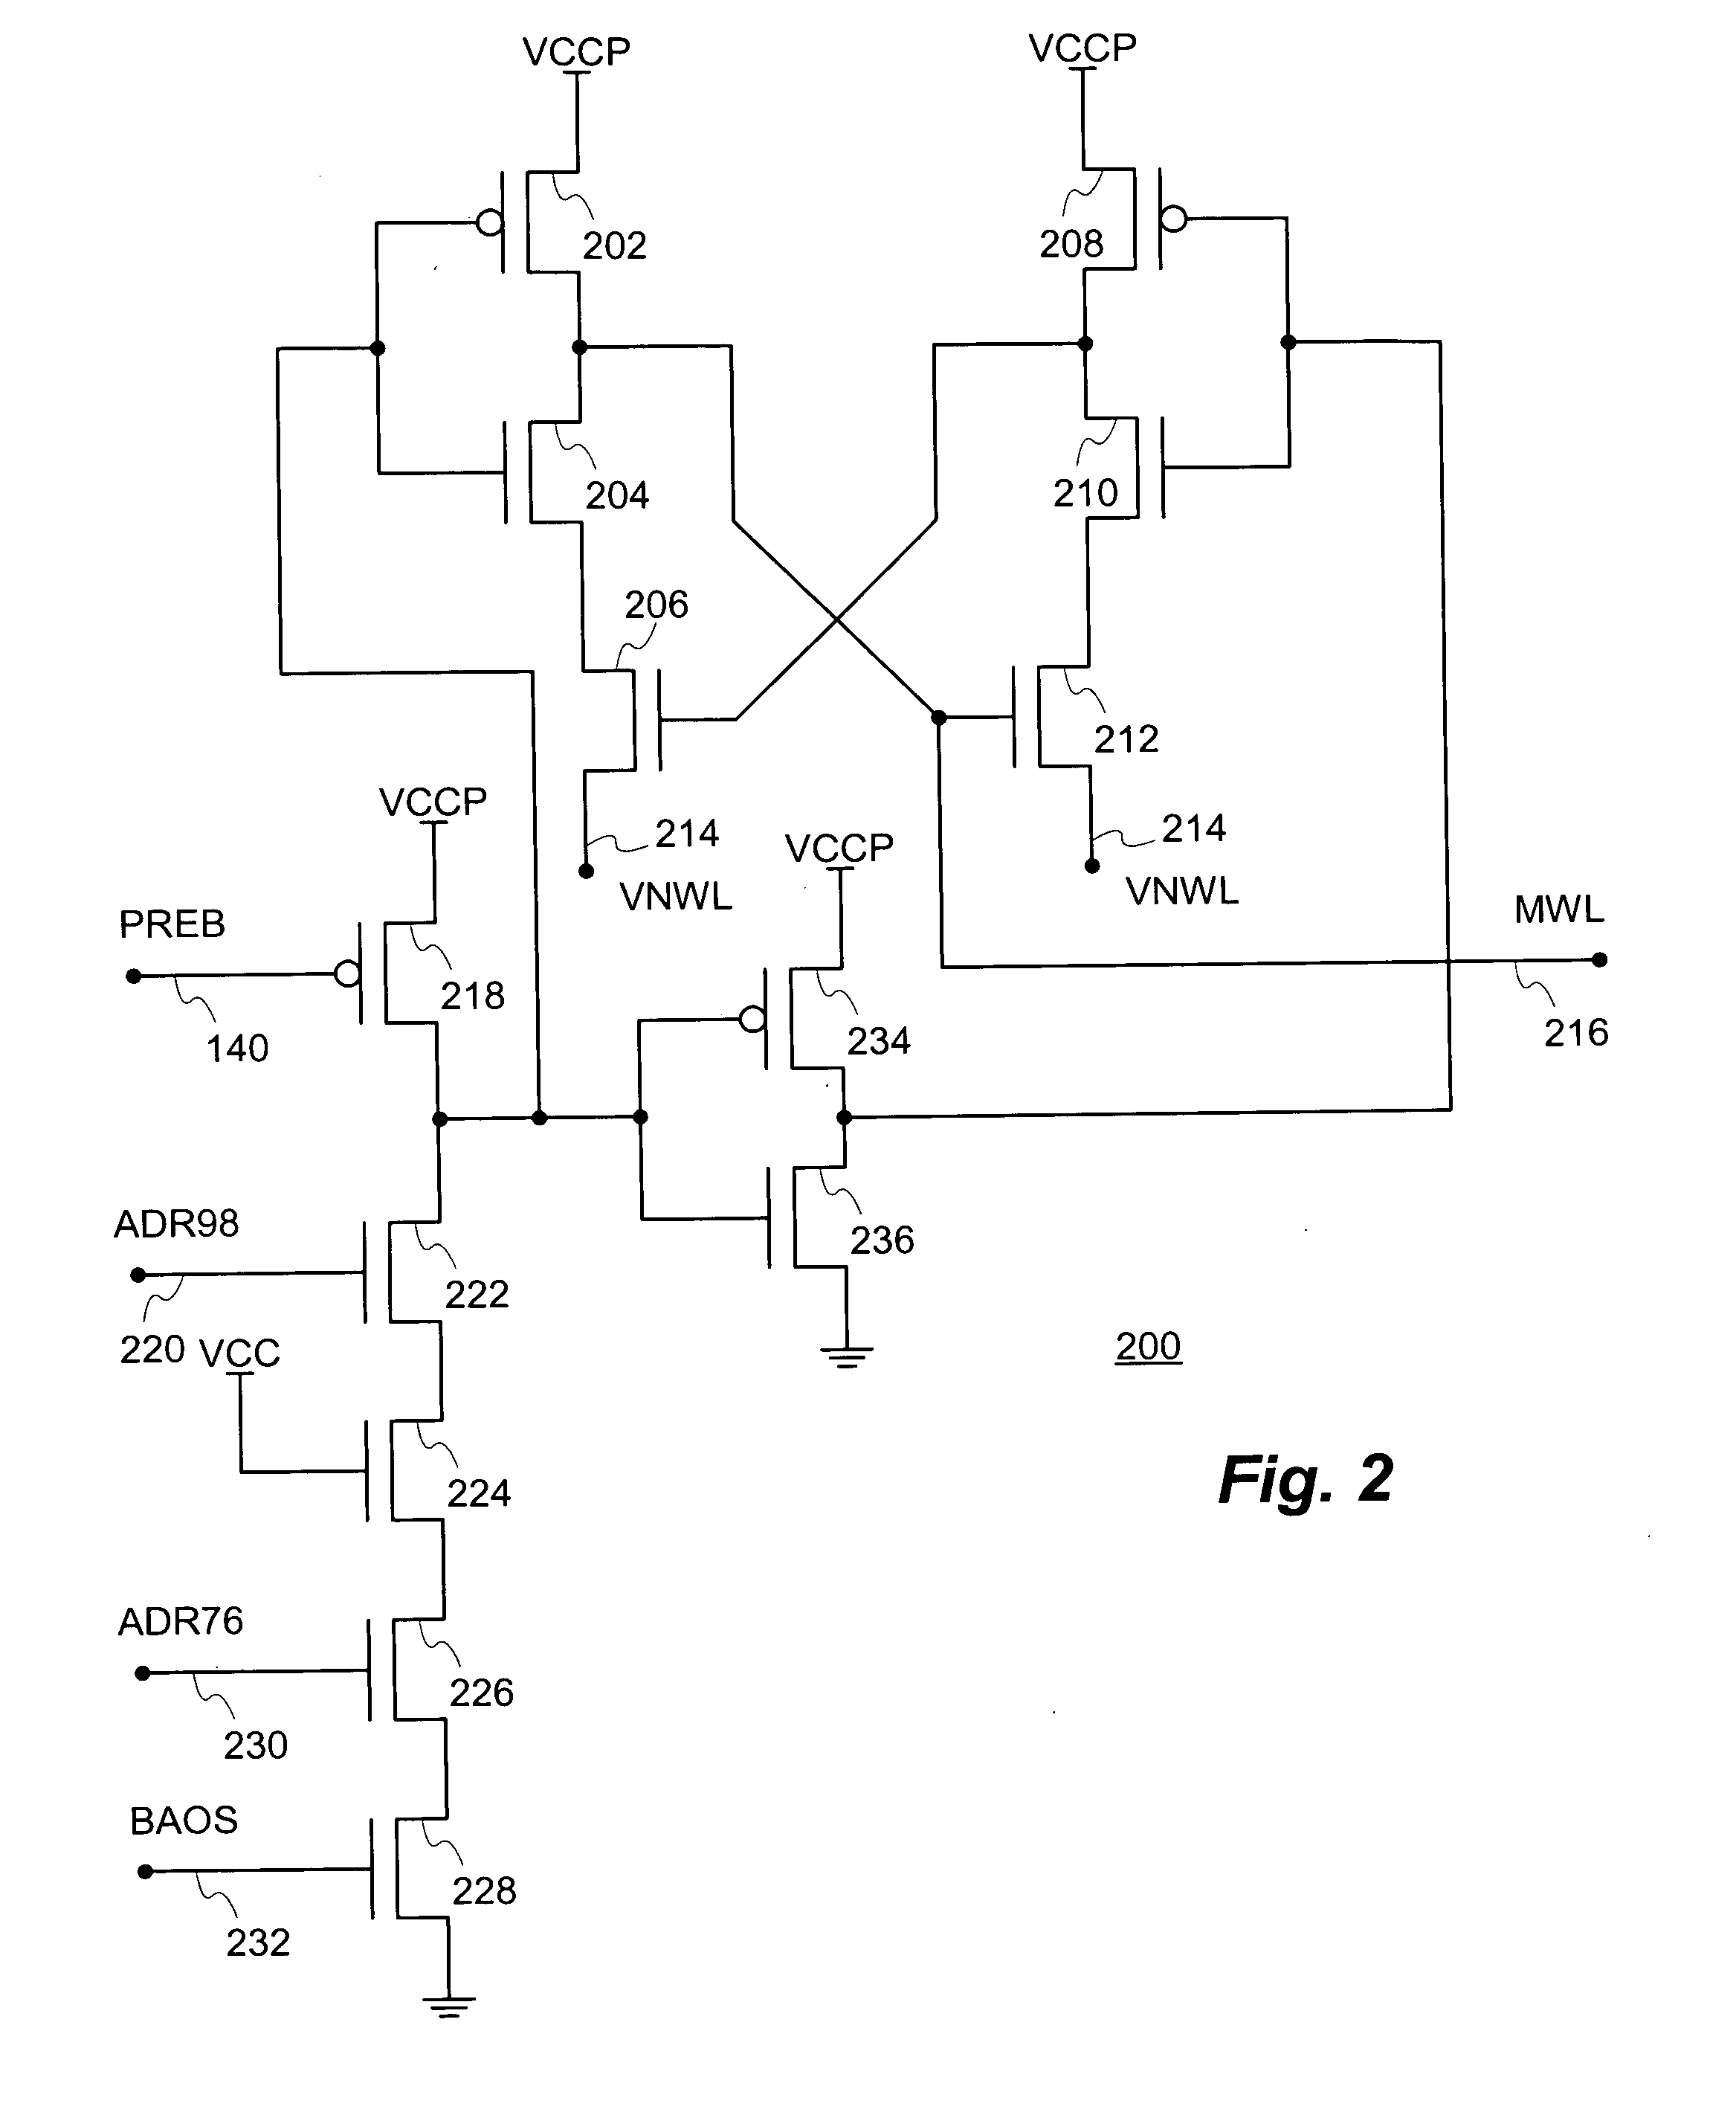 Clock signal initiated precharge technique for active memory subarrays in dynamic random access memory (DRAM) devices and other integrated circuit devices incorporating embedded DRAM